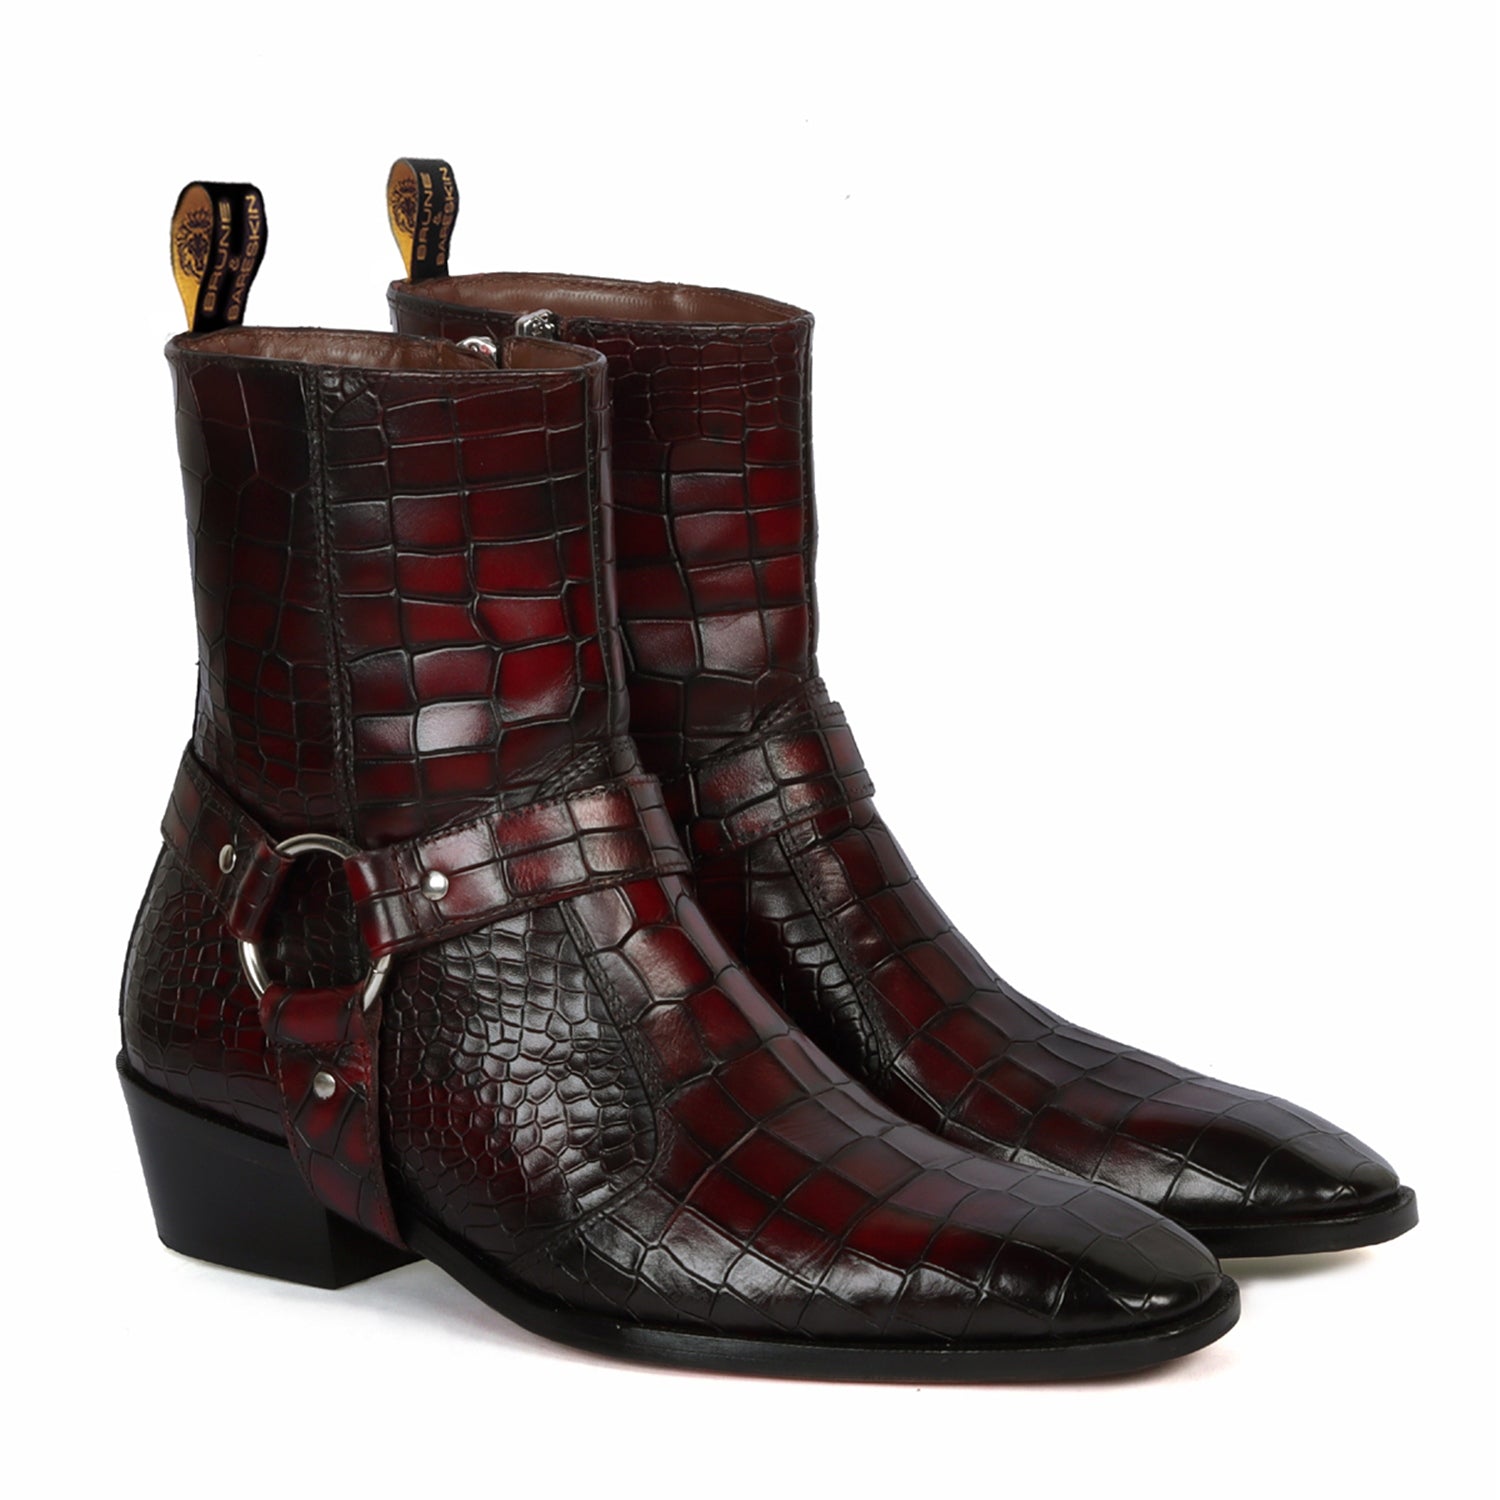 Removable/Adjustable Buckle Smokey Wine Perfect Cuban Heel Croco Textured Leather Boots